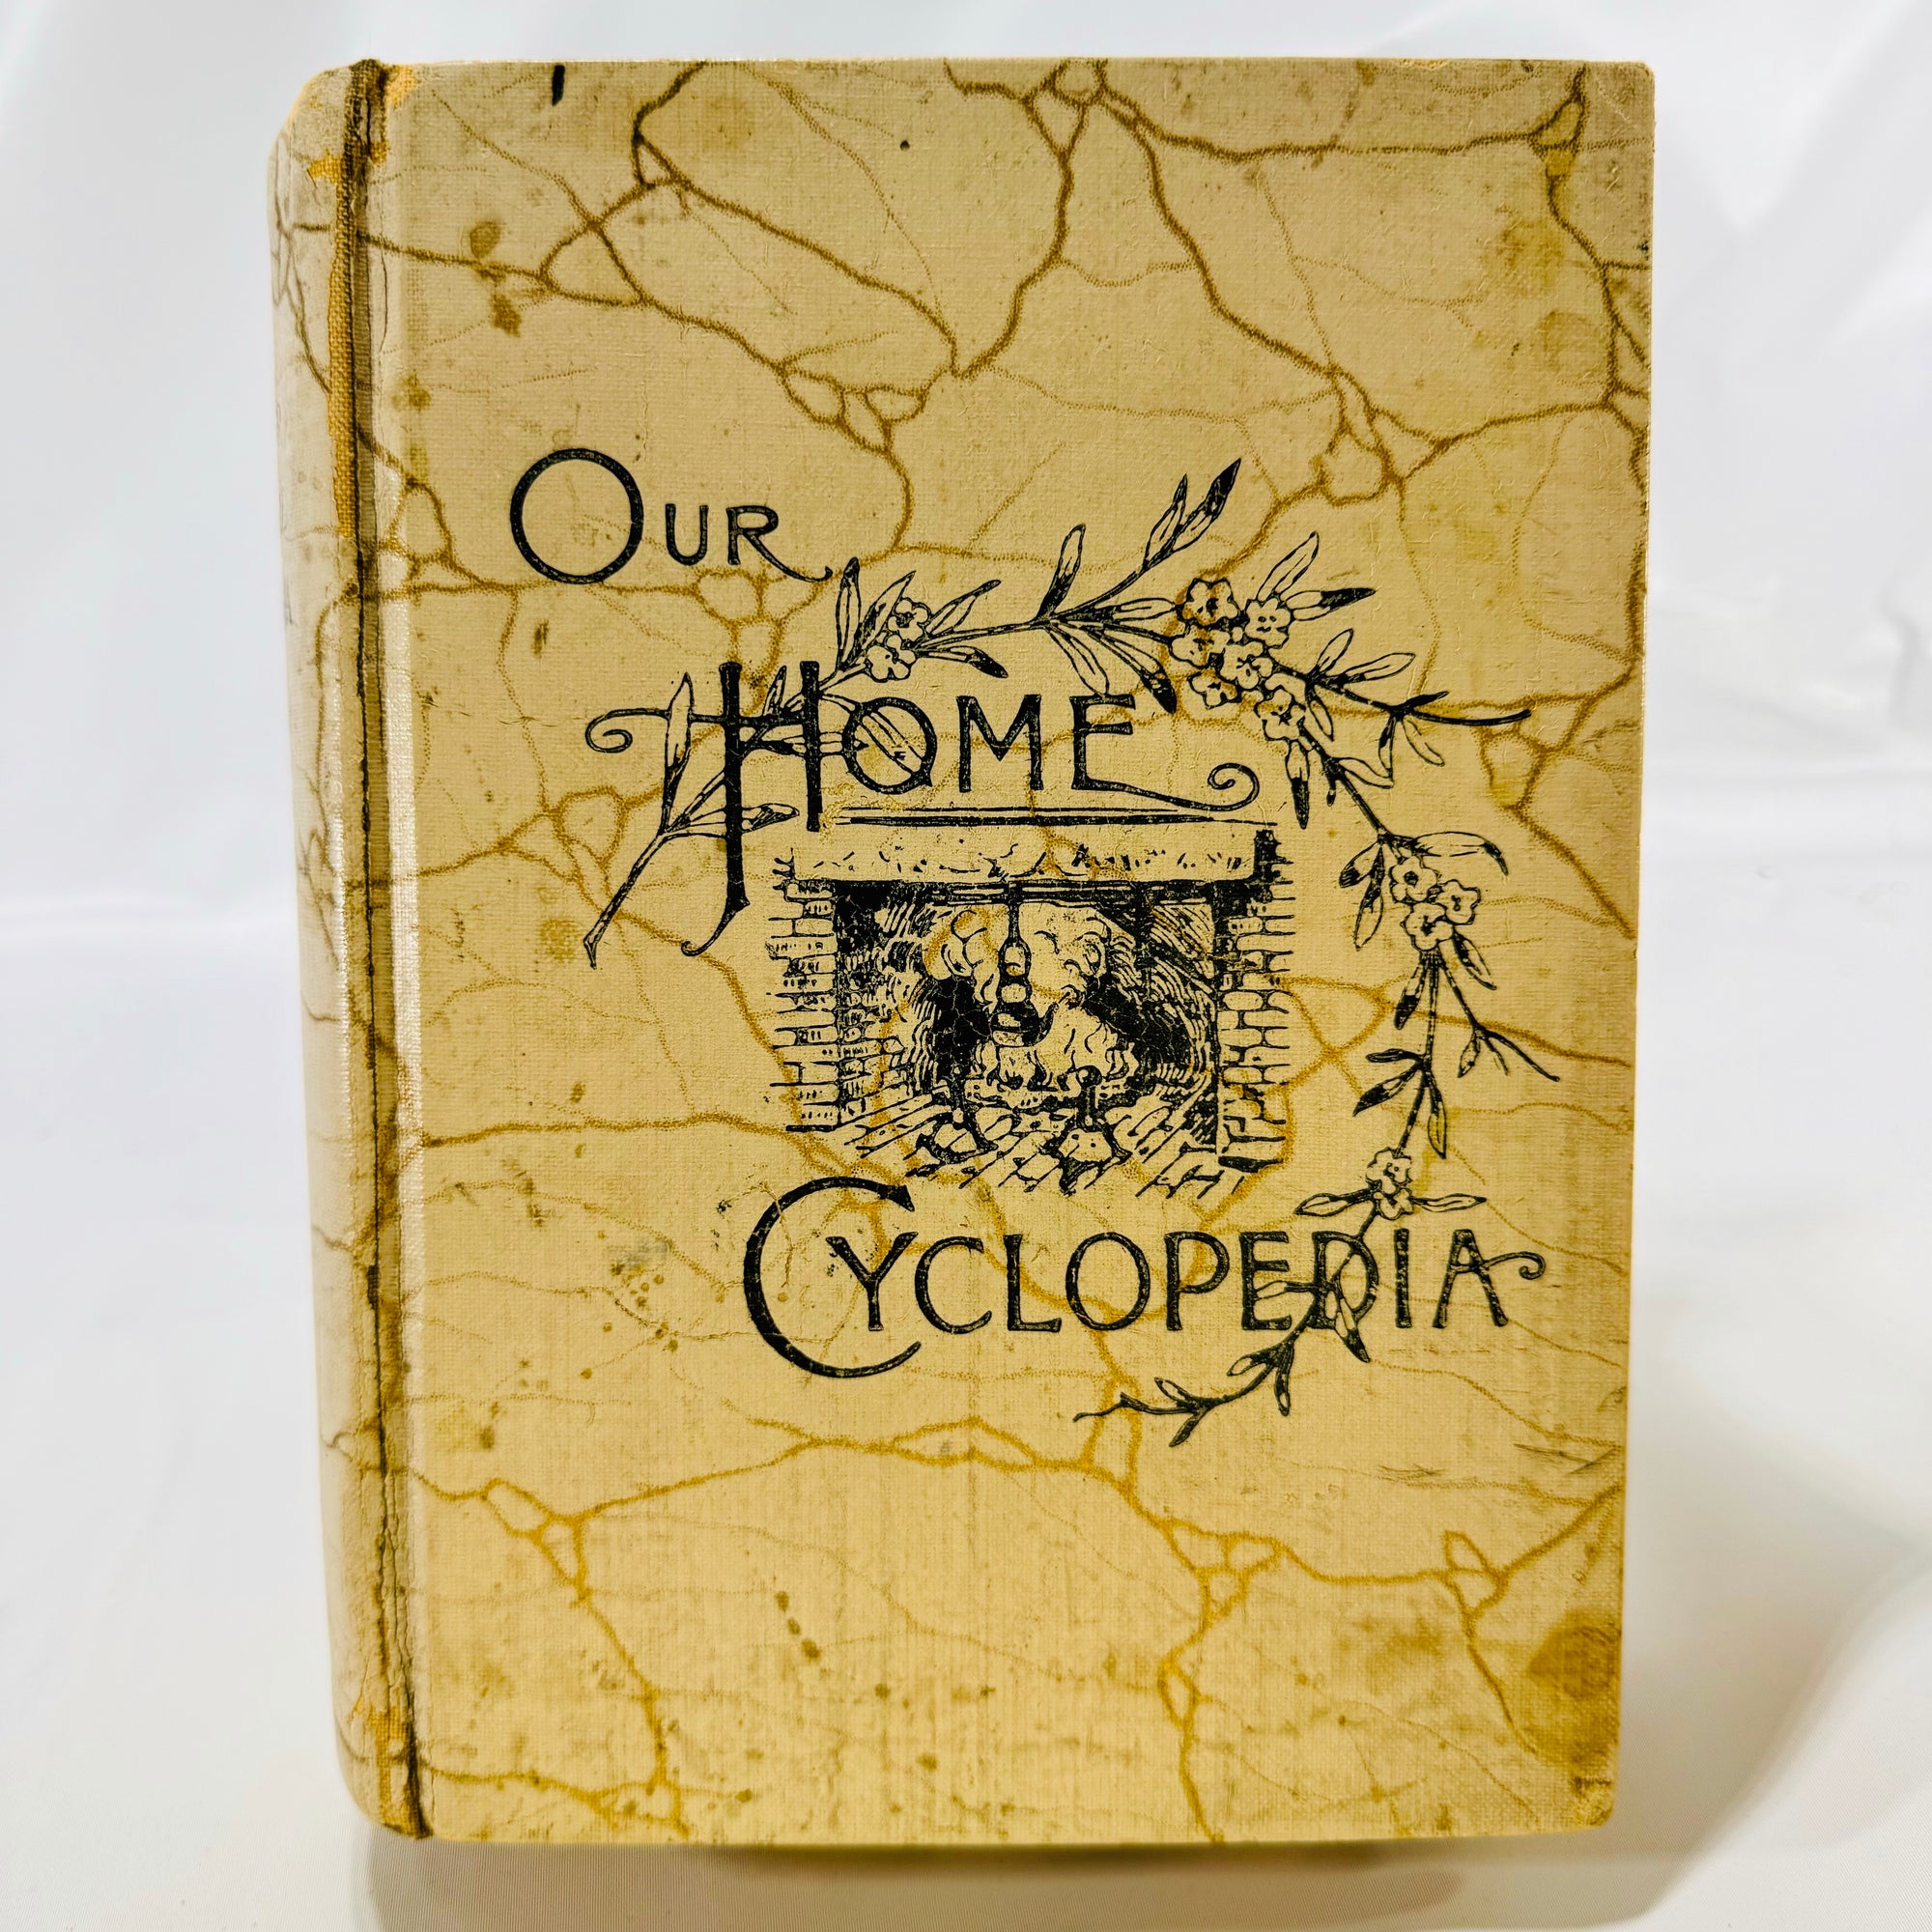 Our Home Cyclopedia Cookery and Housekeeping by Edgar S Darling 1889 The Mercantile Publishing Co, Detroit